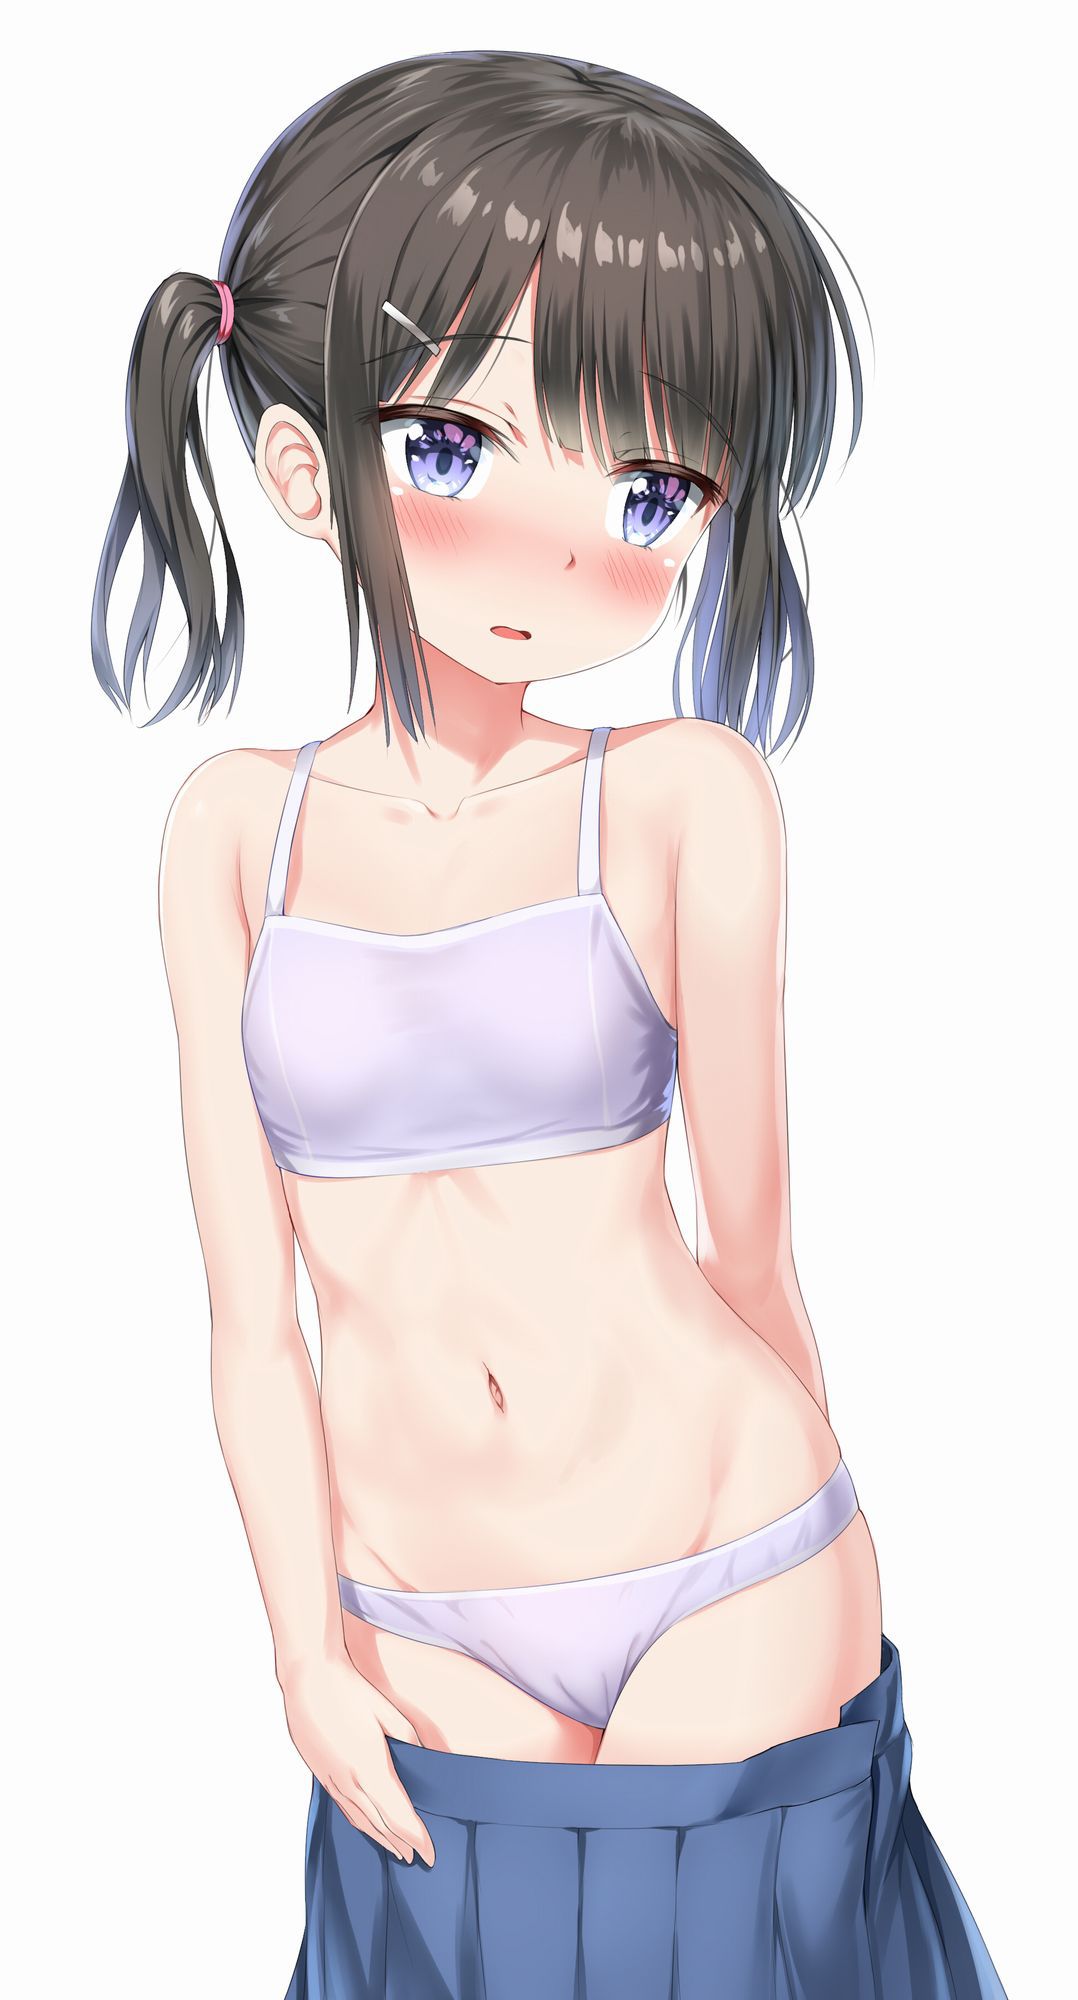 [2nd] The second erotic image of a pretty girl wearing a sports bra [sports bra] 29